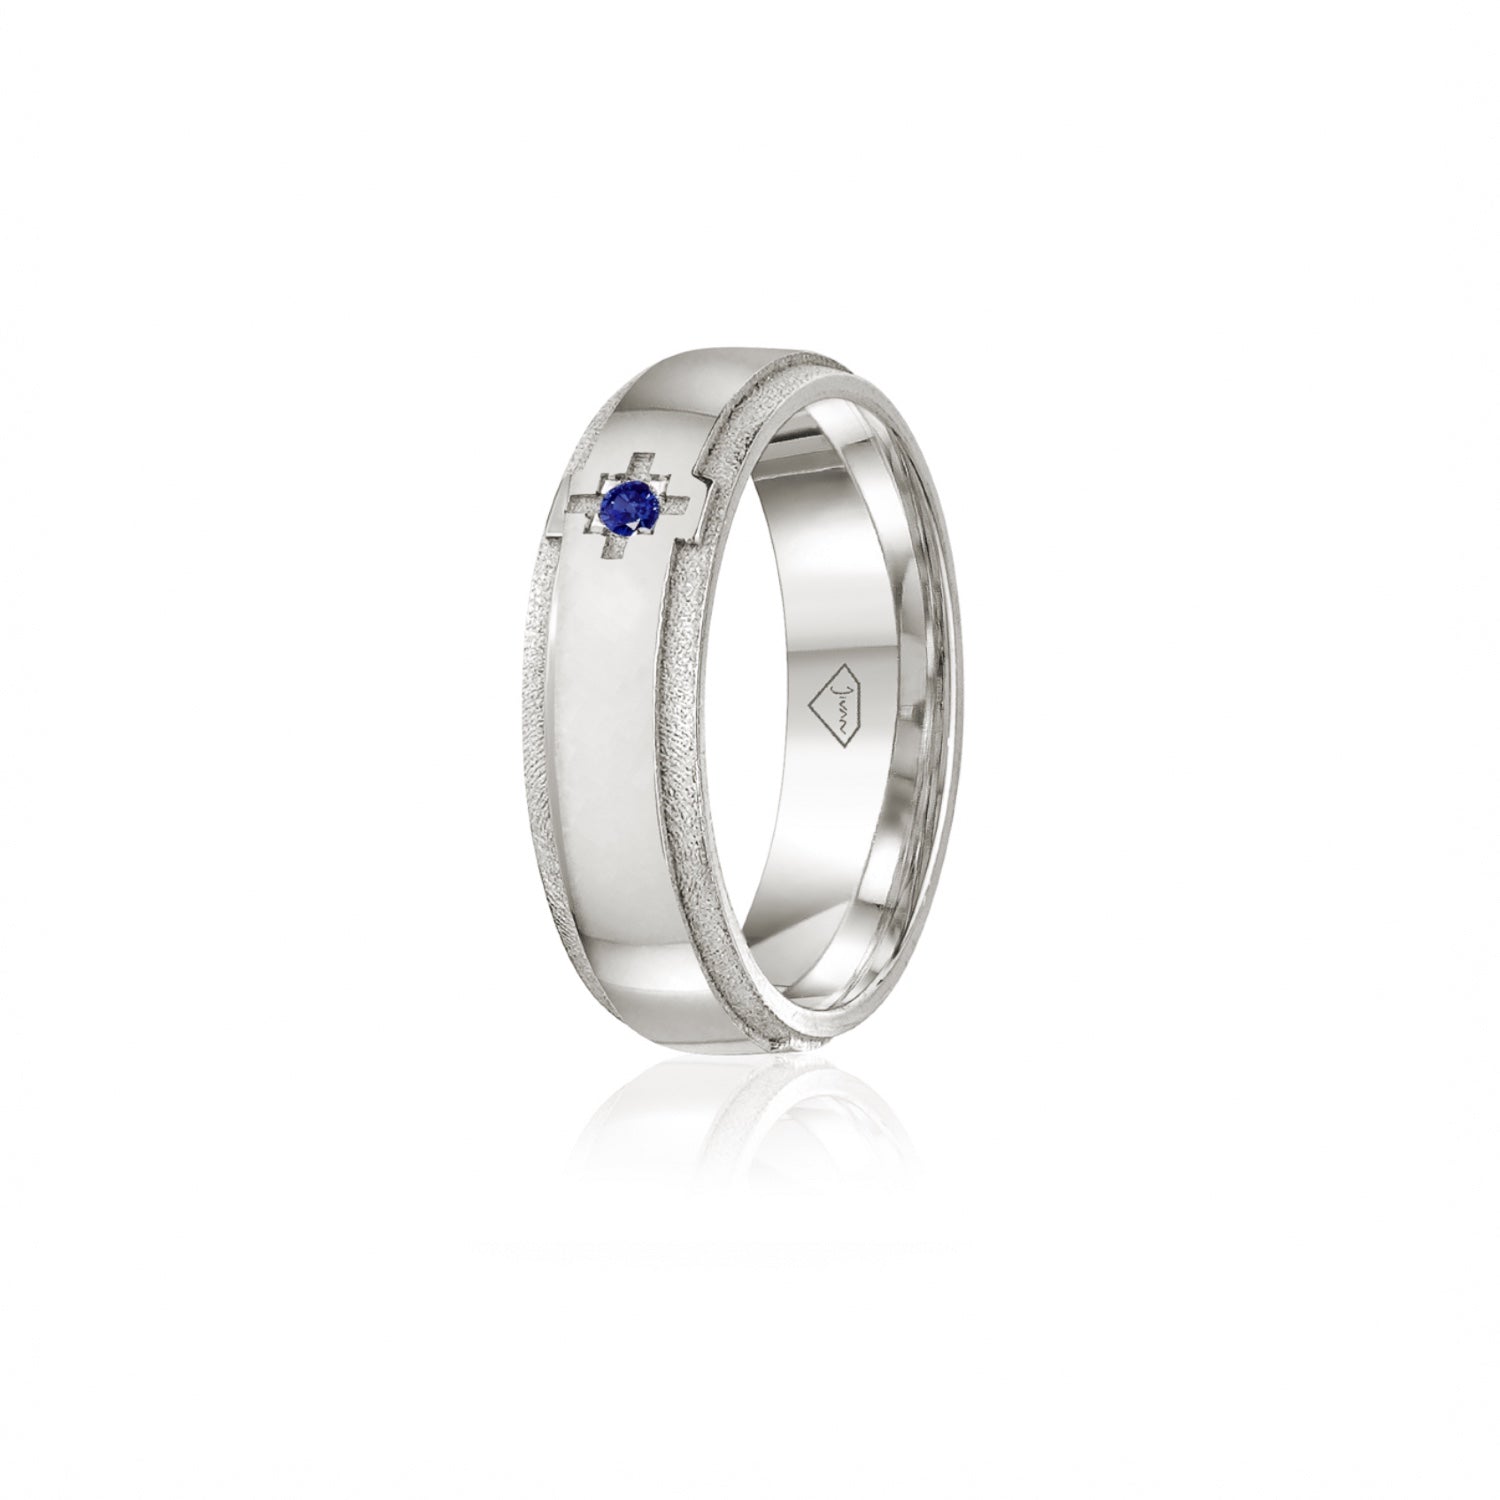 Sapphire Accent Polished Finish Bevelled Edge 8-9 mm Wedding Ring in Platinum